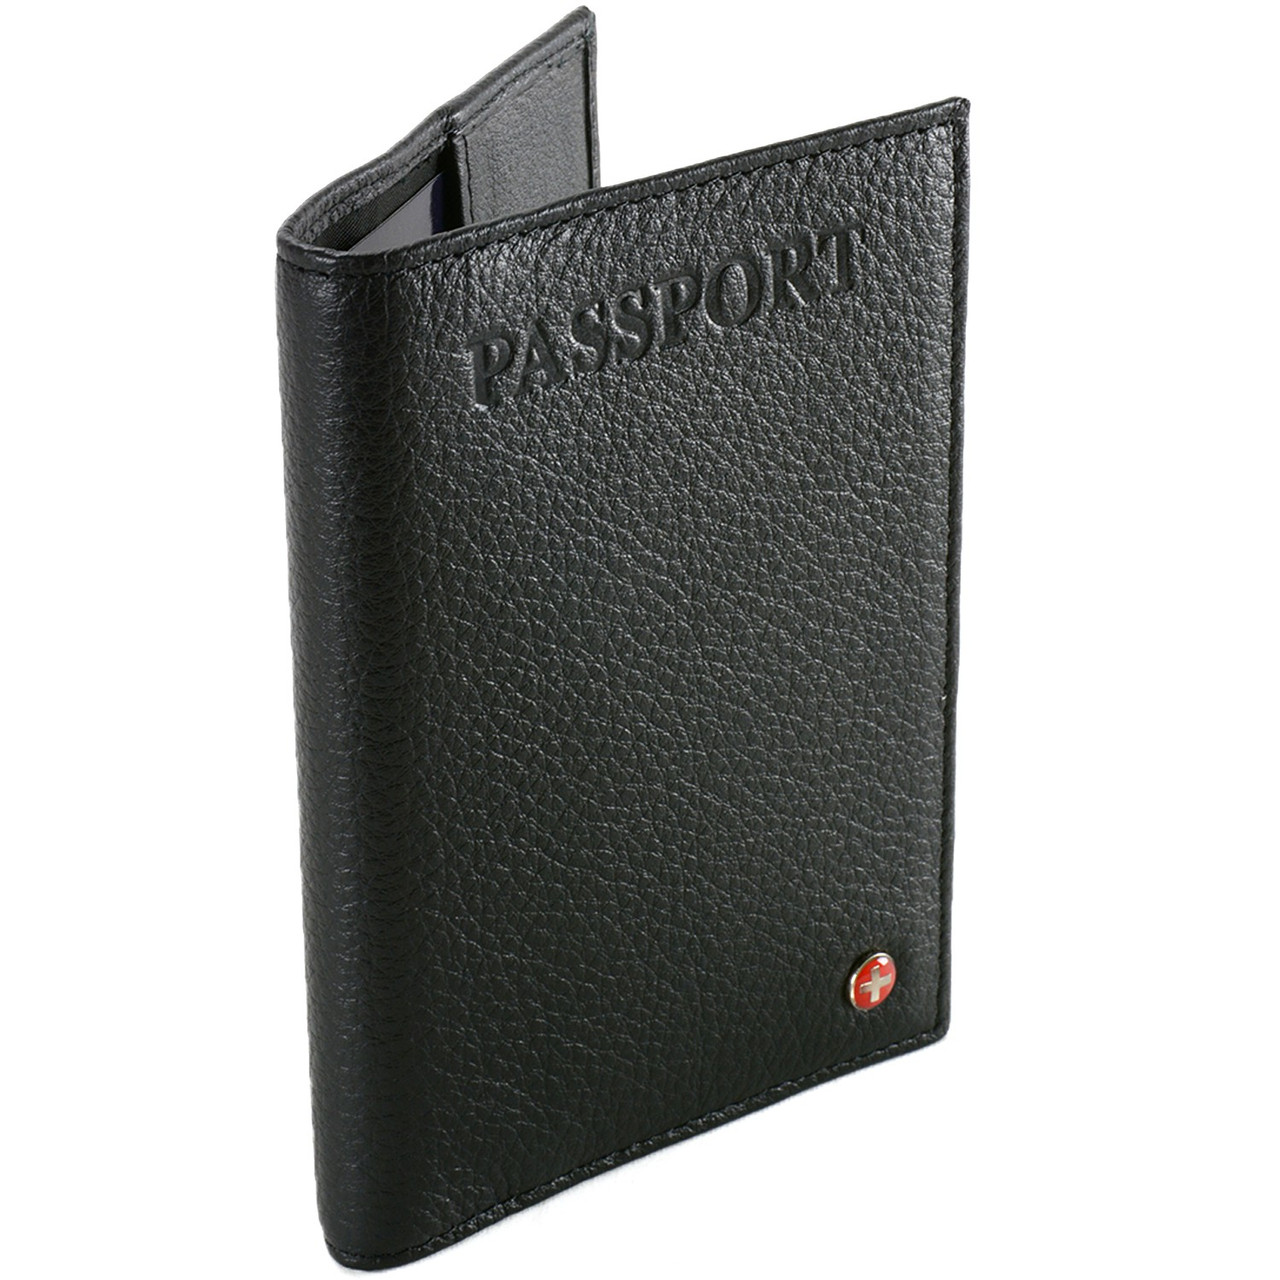 Leather slim travel wallet and passport cover